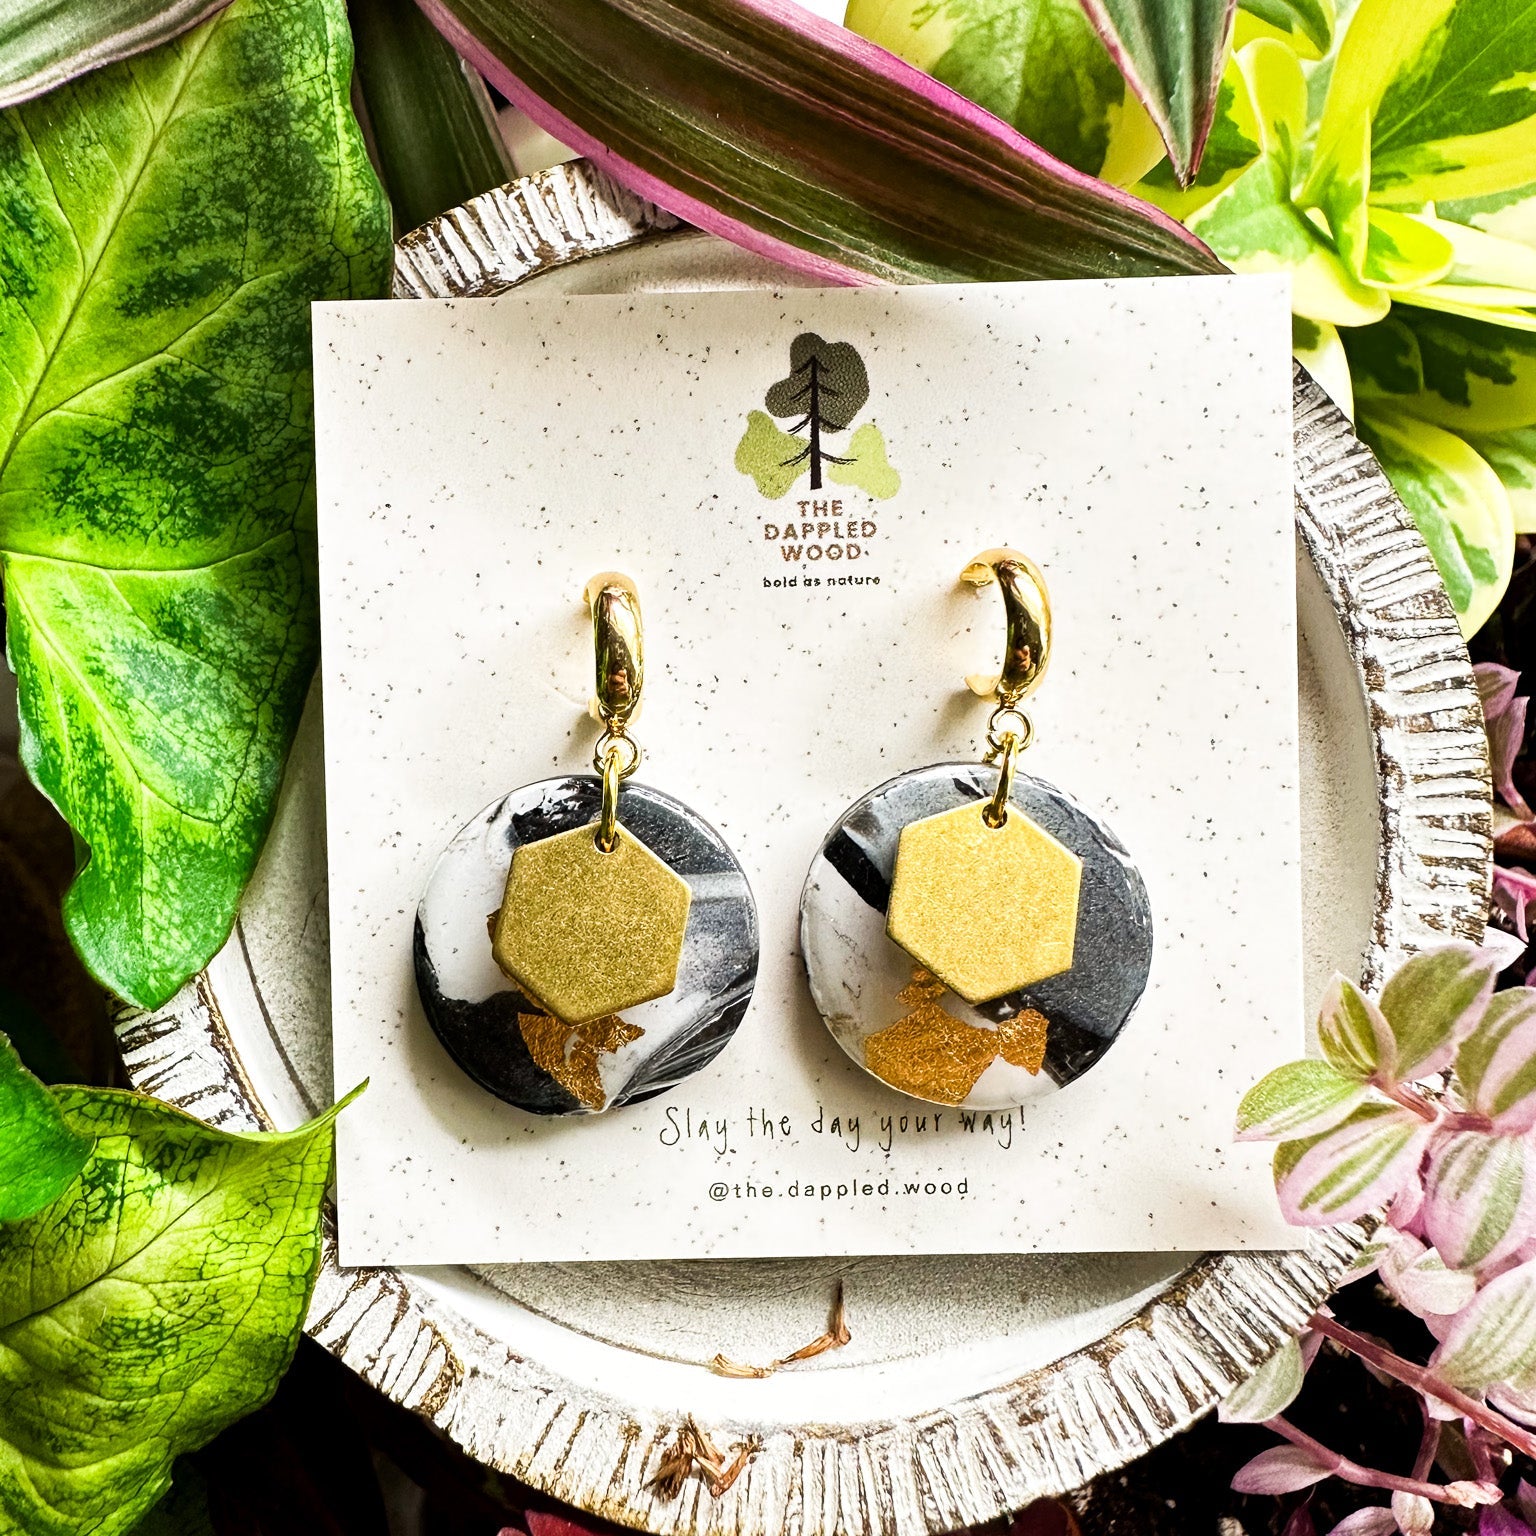 Gold, black and white  polymer clay earrings with brass hexagon charms dangled from gold hooks, presented on a speckled card with The Dappled Wood logo, amidst a lush background of green and pink plants.